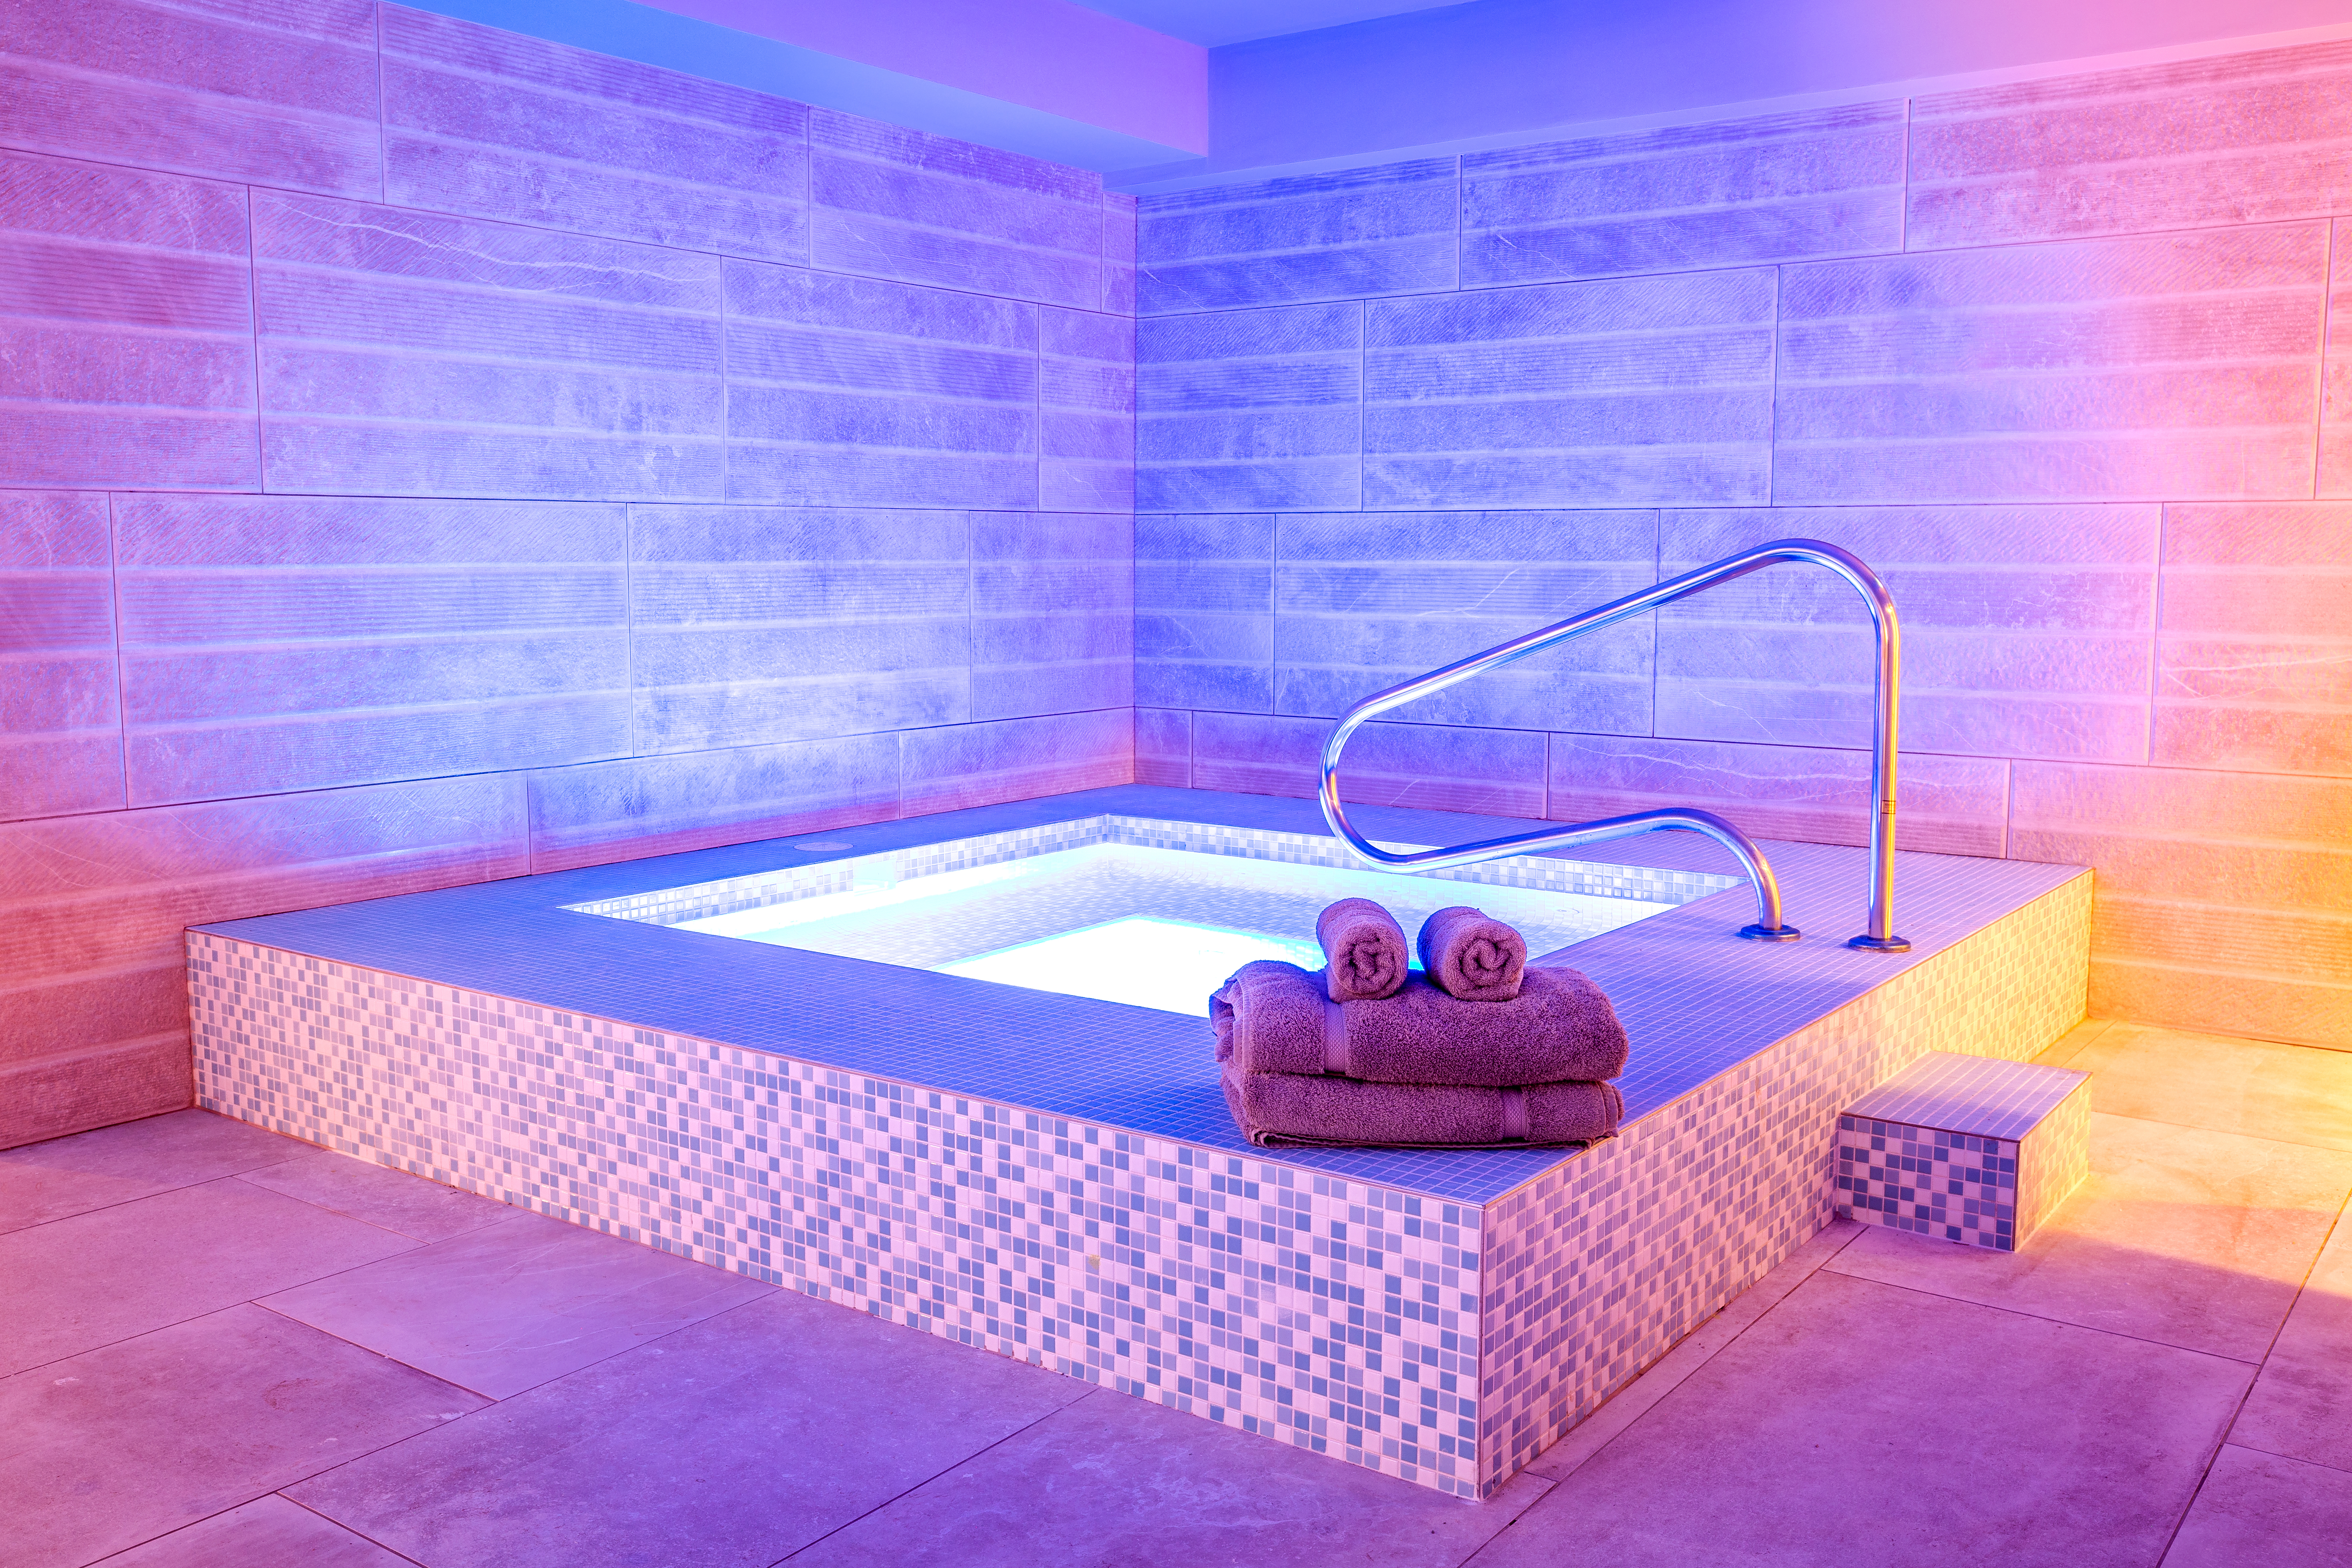 Twilight Spa For Two, The Harrogate Spa At DoubleTree By Hilton Harrog